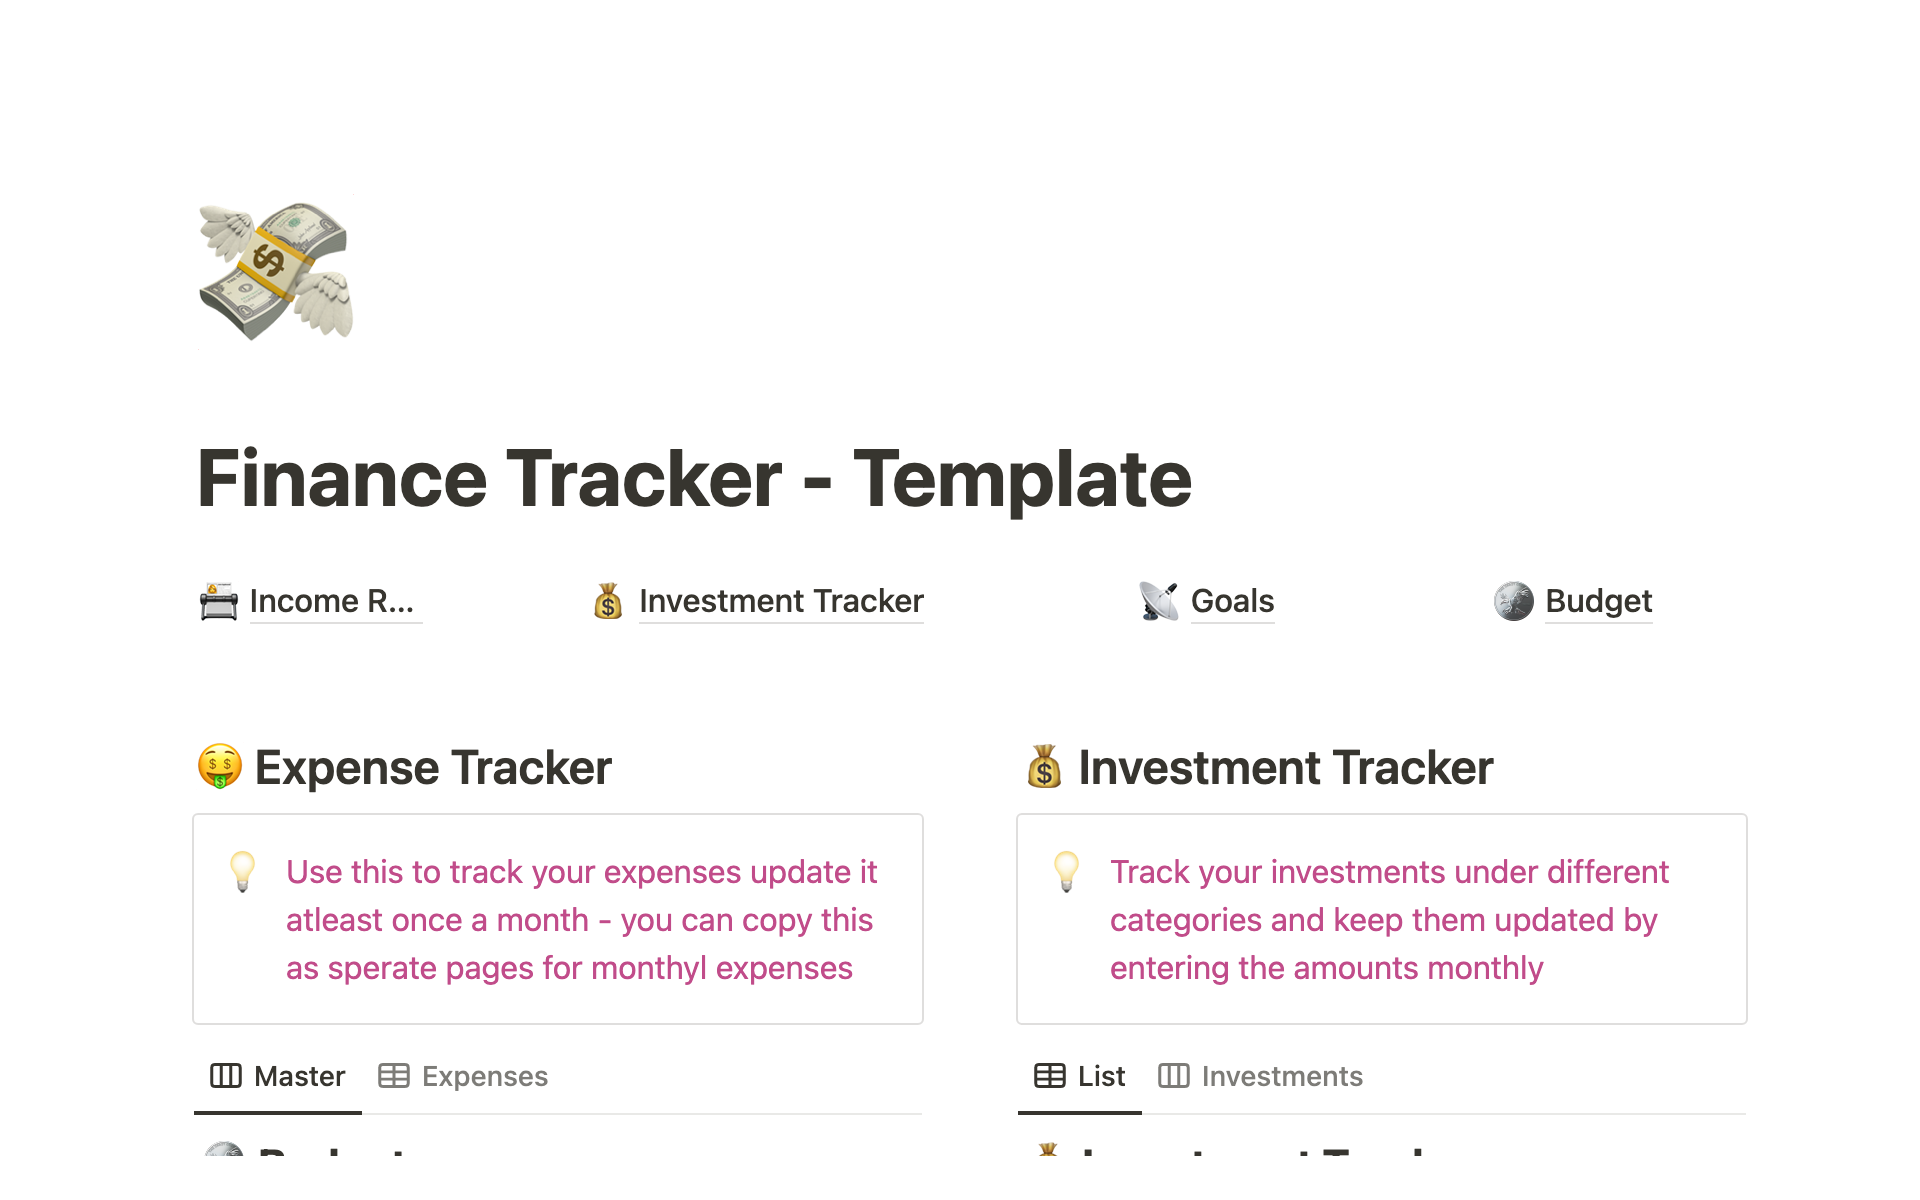 Helps you track and manage personal finances.